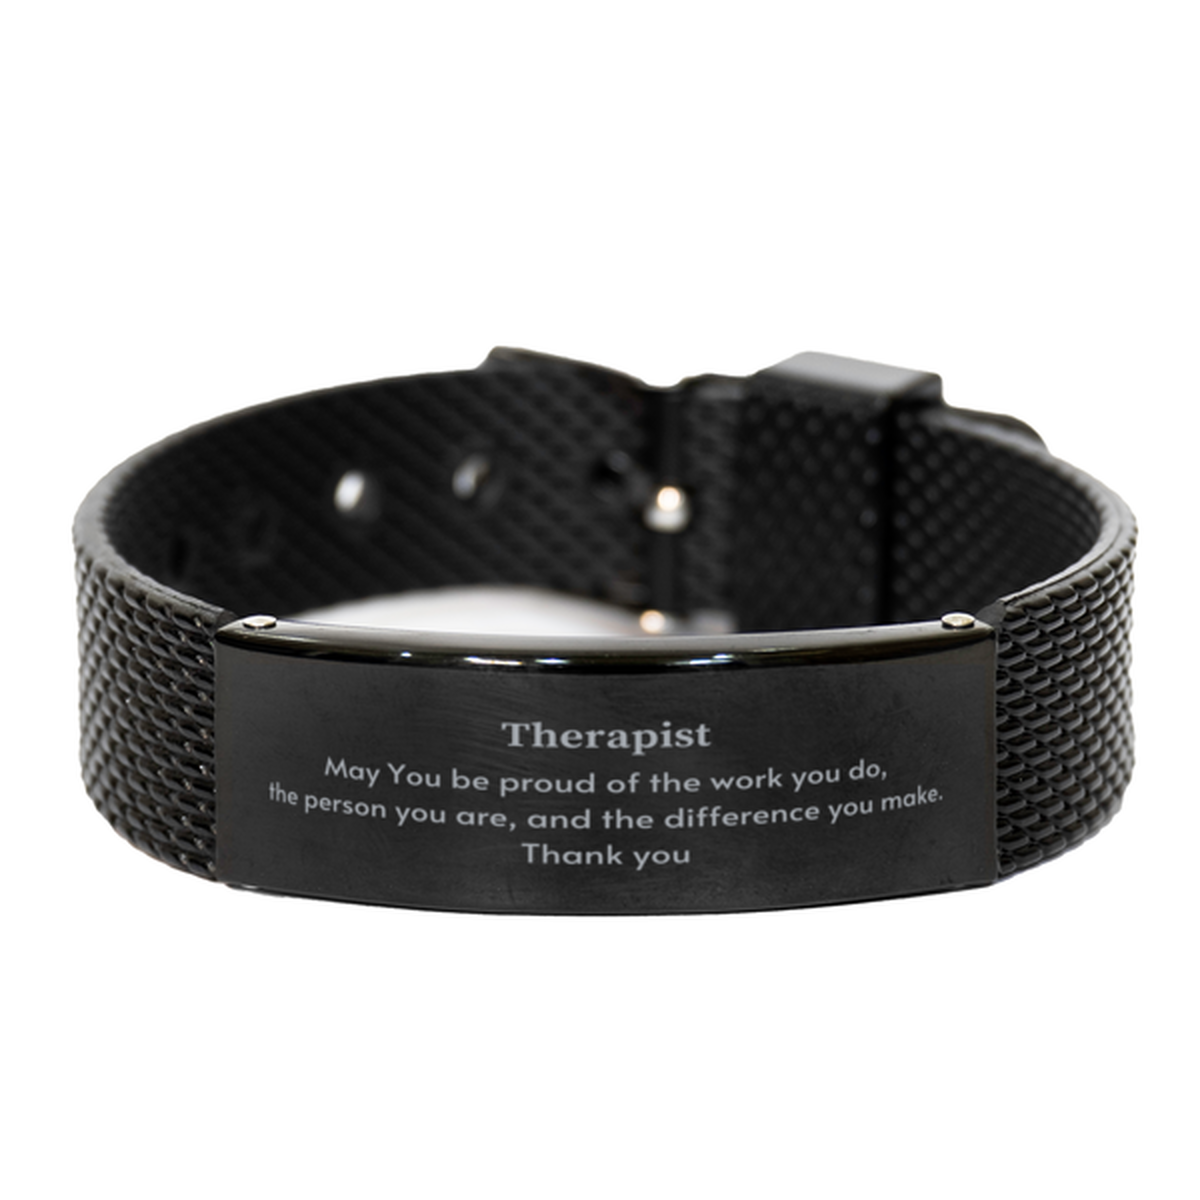 Heartwarming Black Shark Mesh Bracelet Retirement Coworkers Gifts for Therapist, Therapist May You be proud of the work you do, the person you are Gifts for Boss Men Women Friends